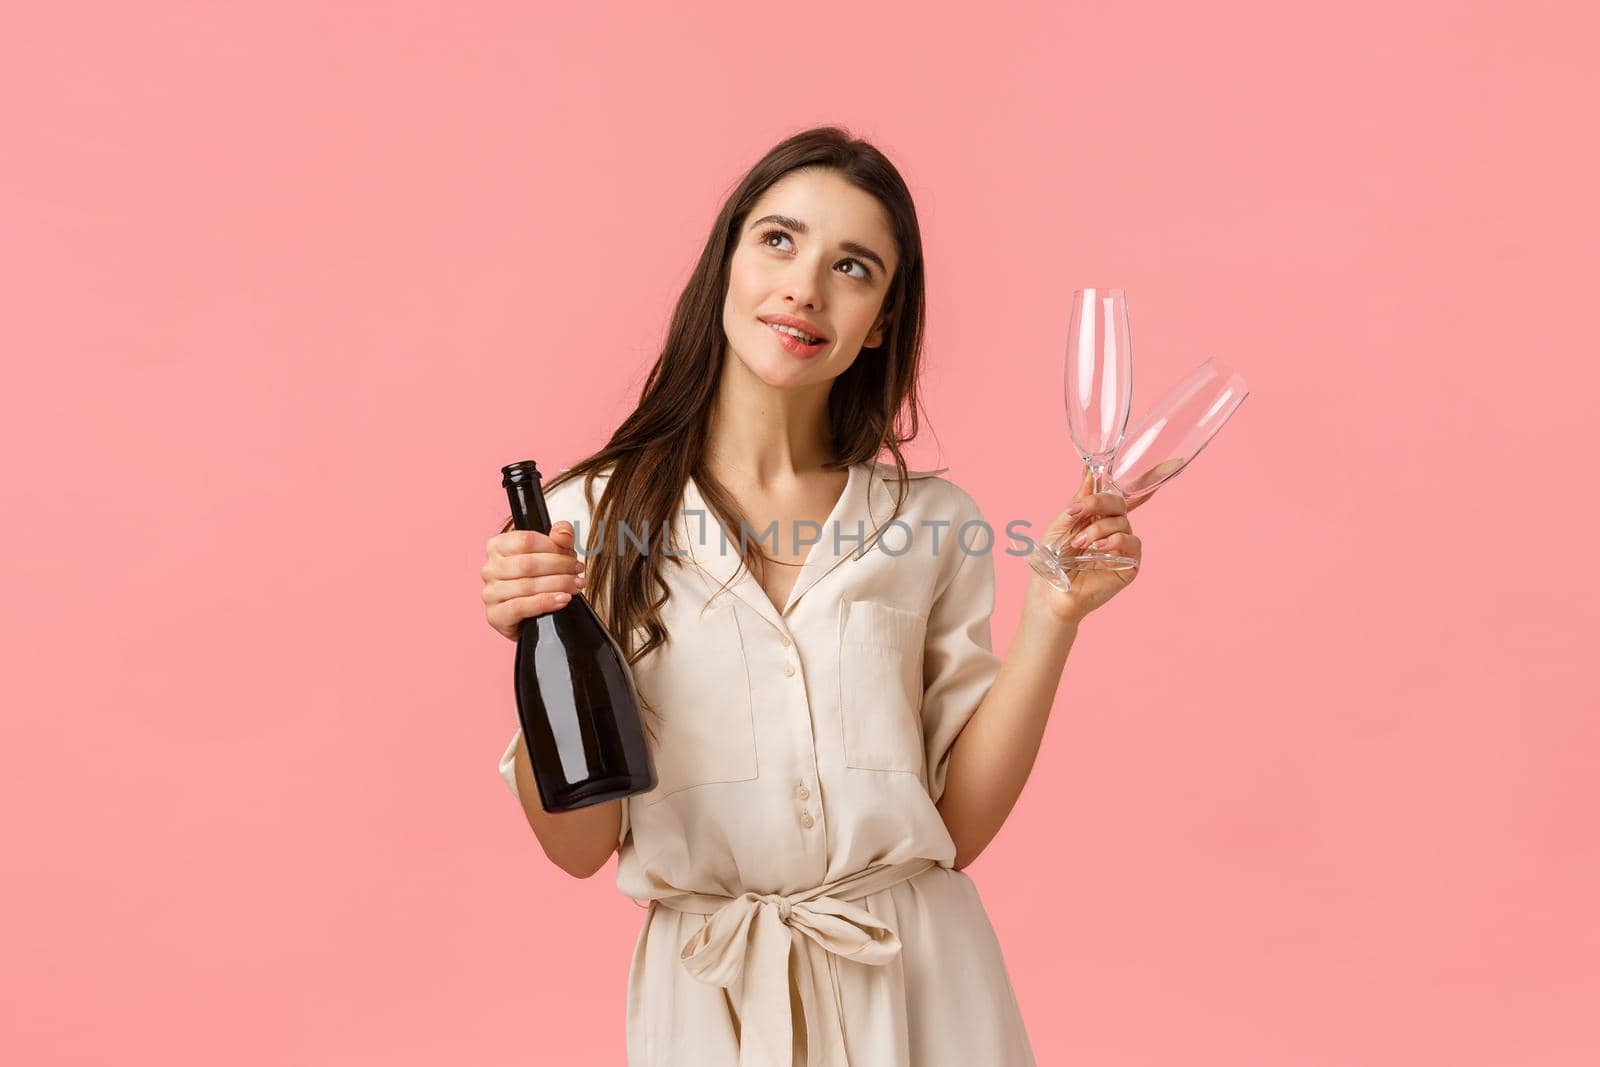 Dreamy and romantic young beautiful woman planning valentines day date, standing thoughtful looking up imaging perfect wedding, holding champagne and two glasses, smiling sensual.